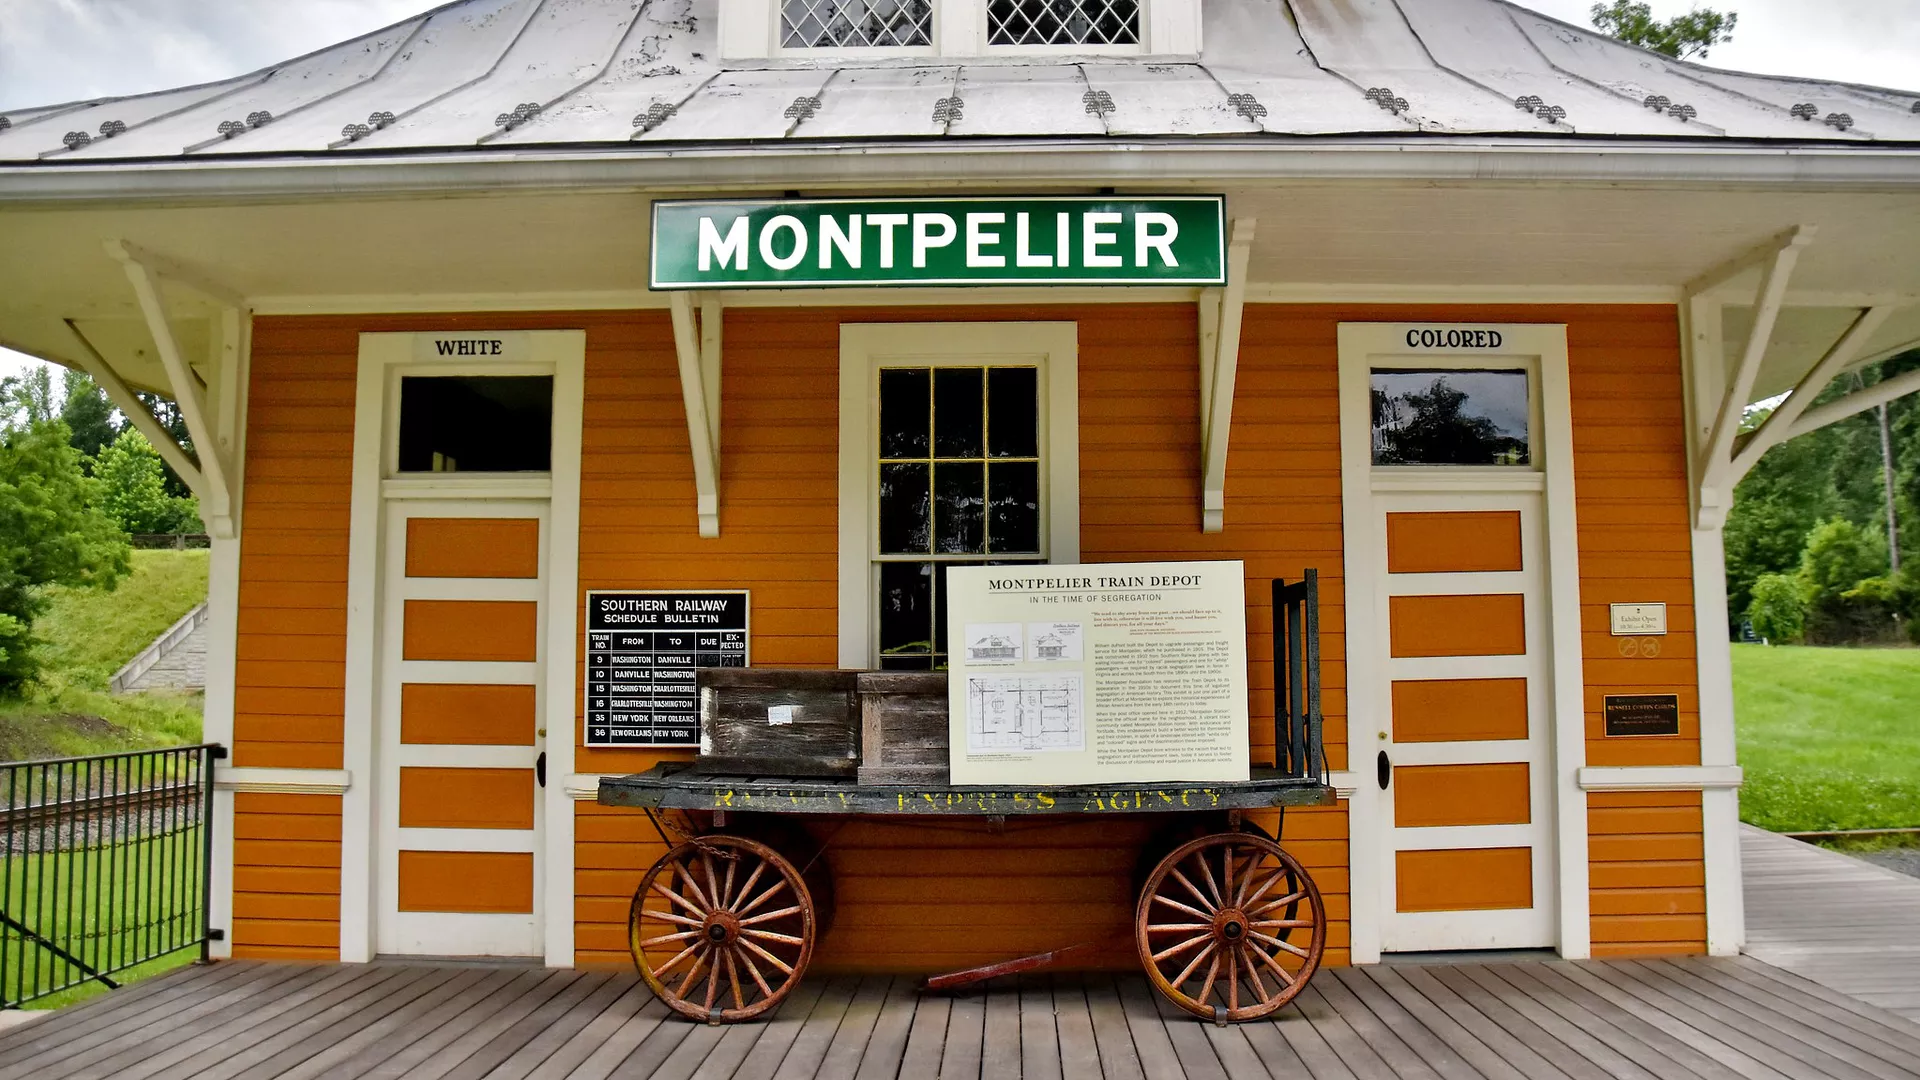 the outside of an orange building that looks old timey and says montpiler on it.